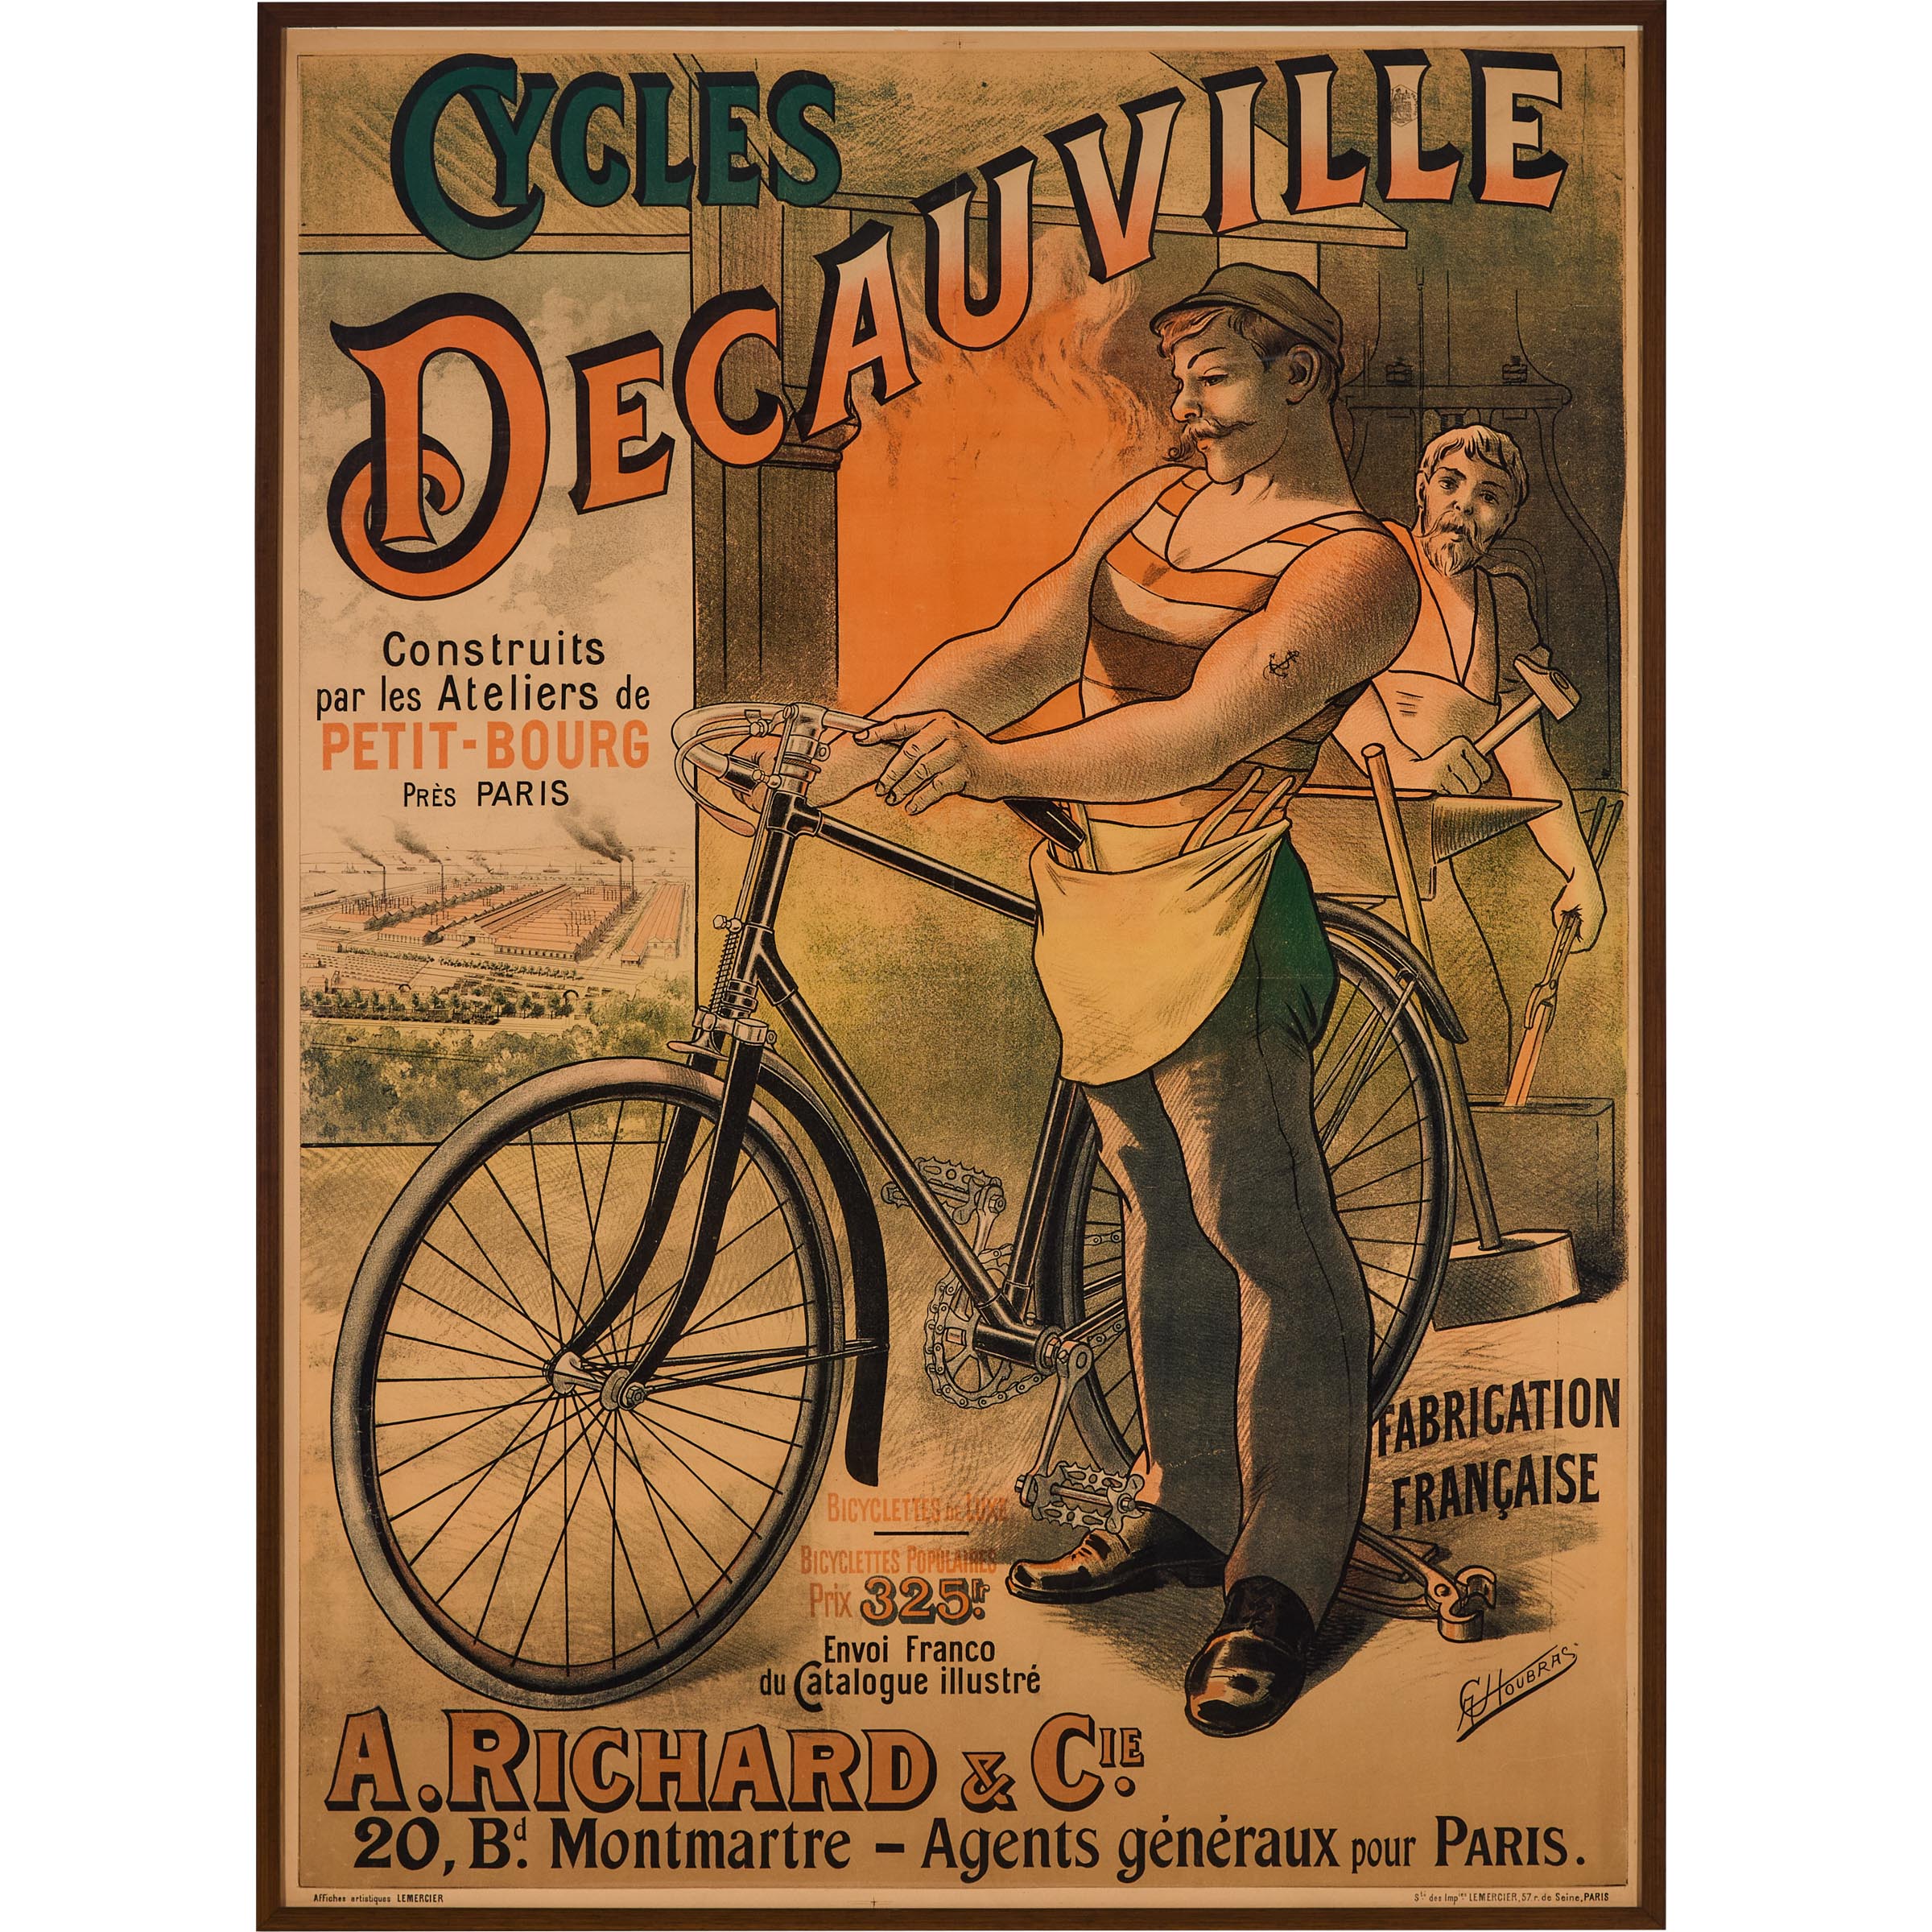 French Large Format 'Cycles Decauville'